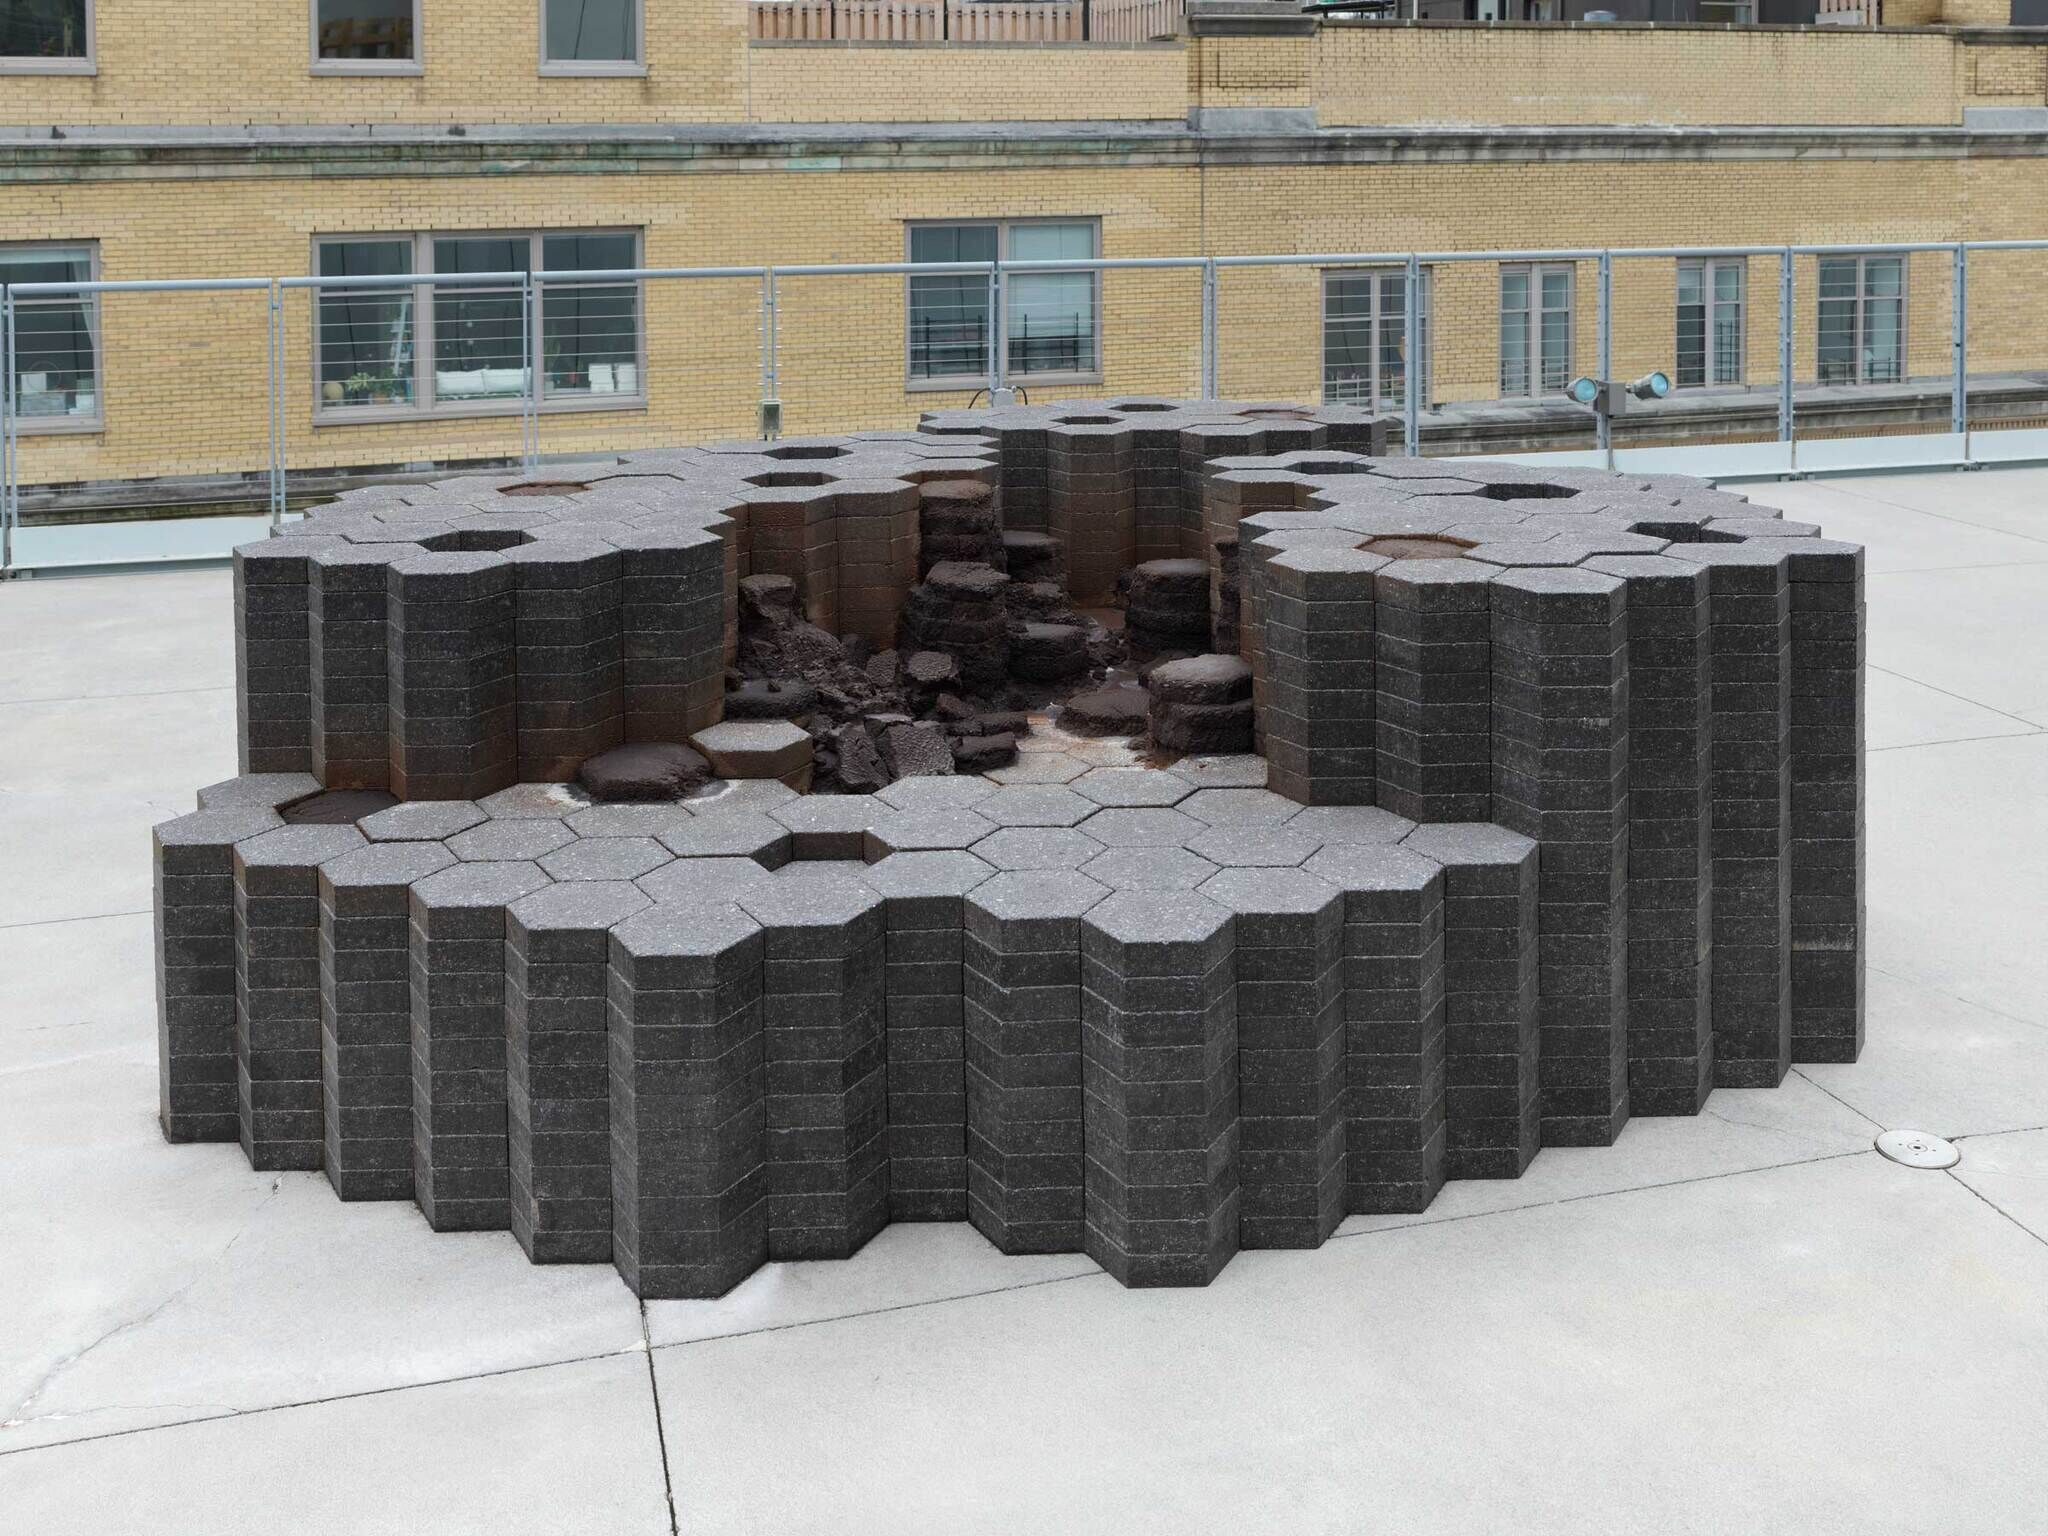 A sculpture made of dark hexagons stacked on top of each other.